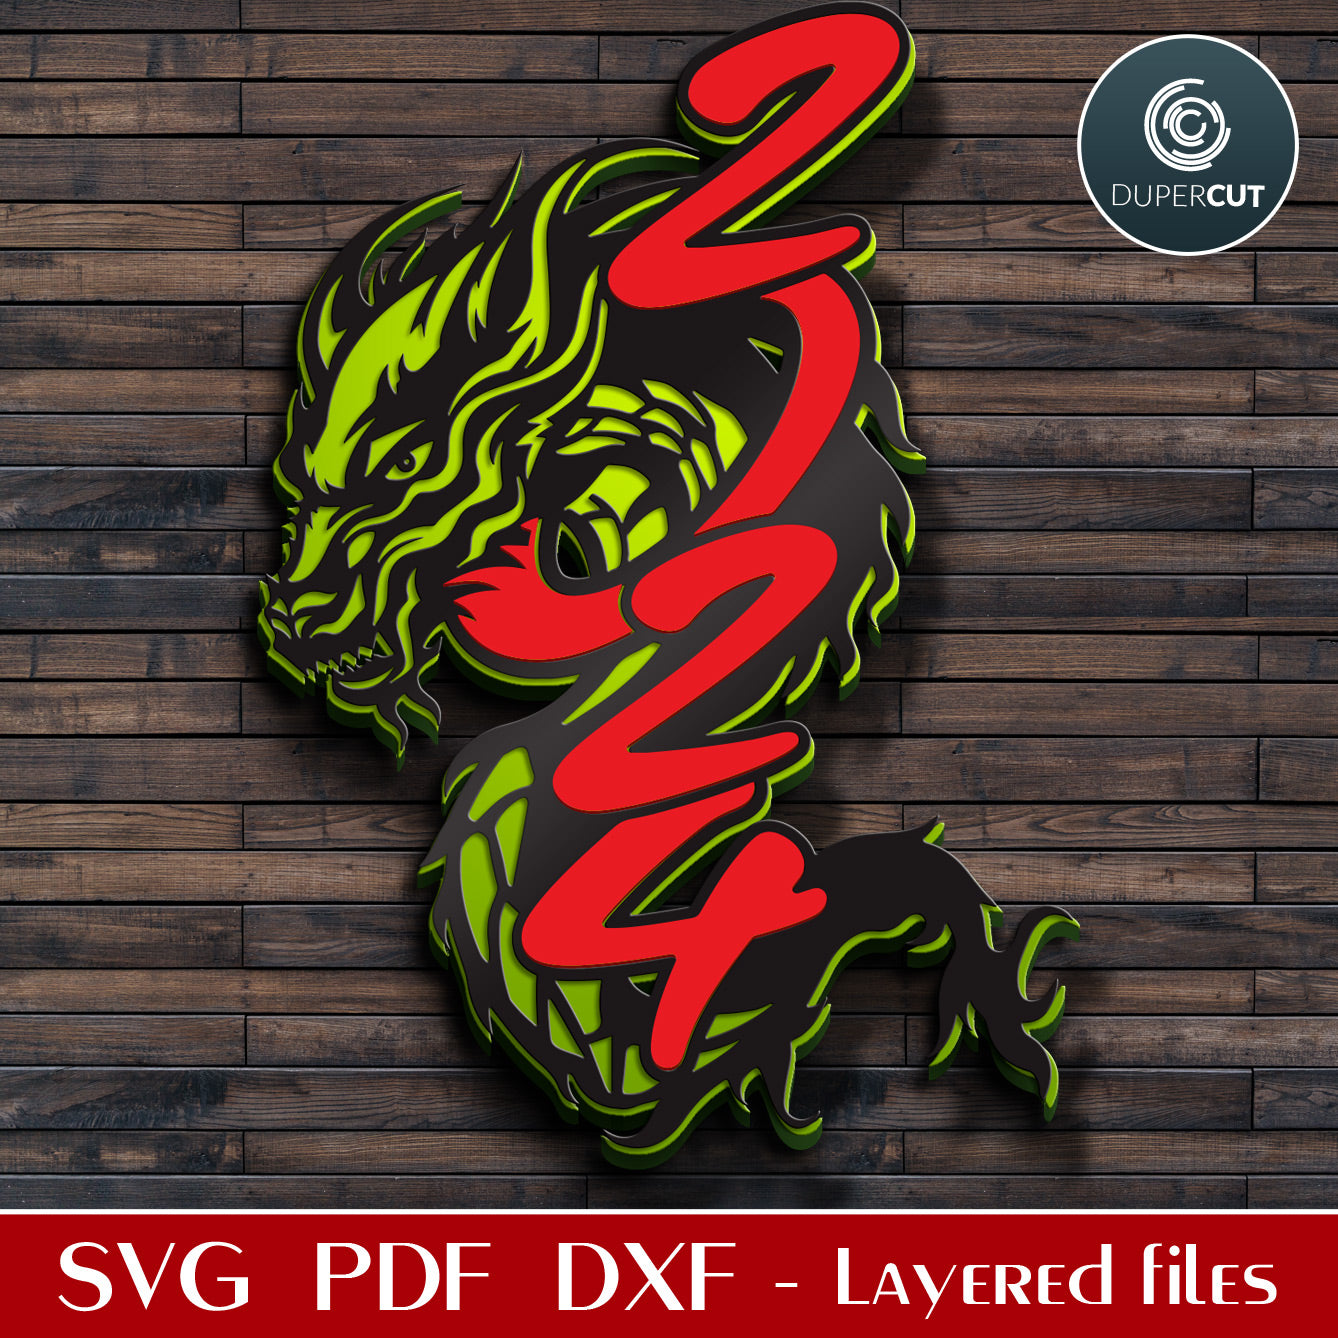 Chinese zodiac year of the Dragon - SVG DXF layered cut template for Glowforge, Cricut, Xtool, laser cutting machines by www.DuperCut.com